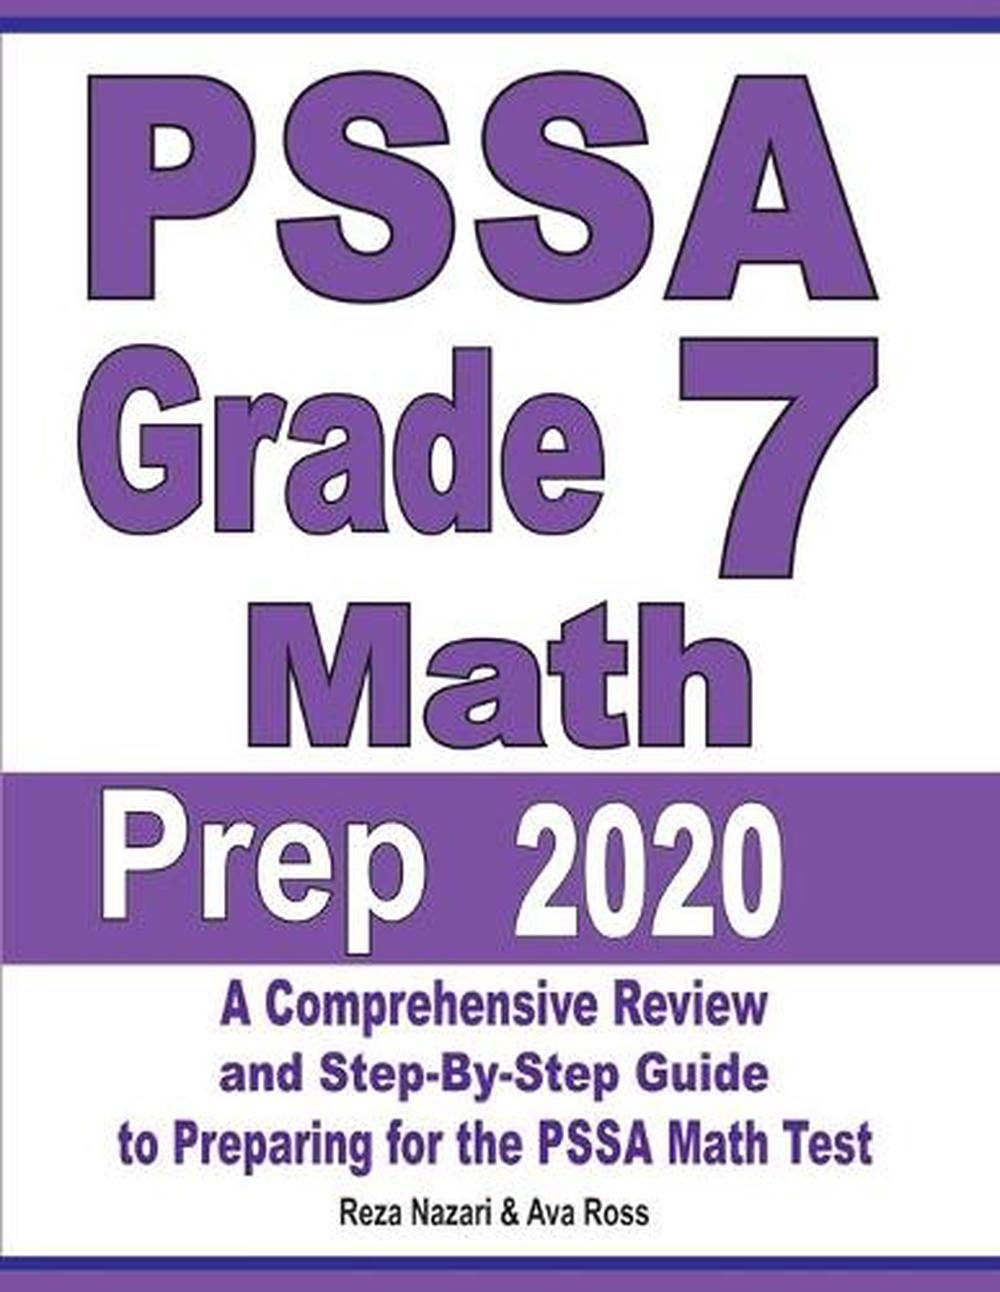 pssa-grade-7-math-prep-2020-a-comprehensive-review-and-step-by-step